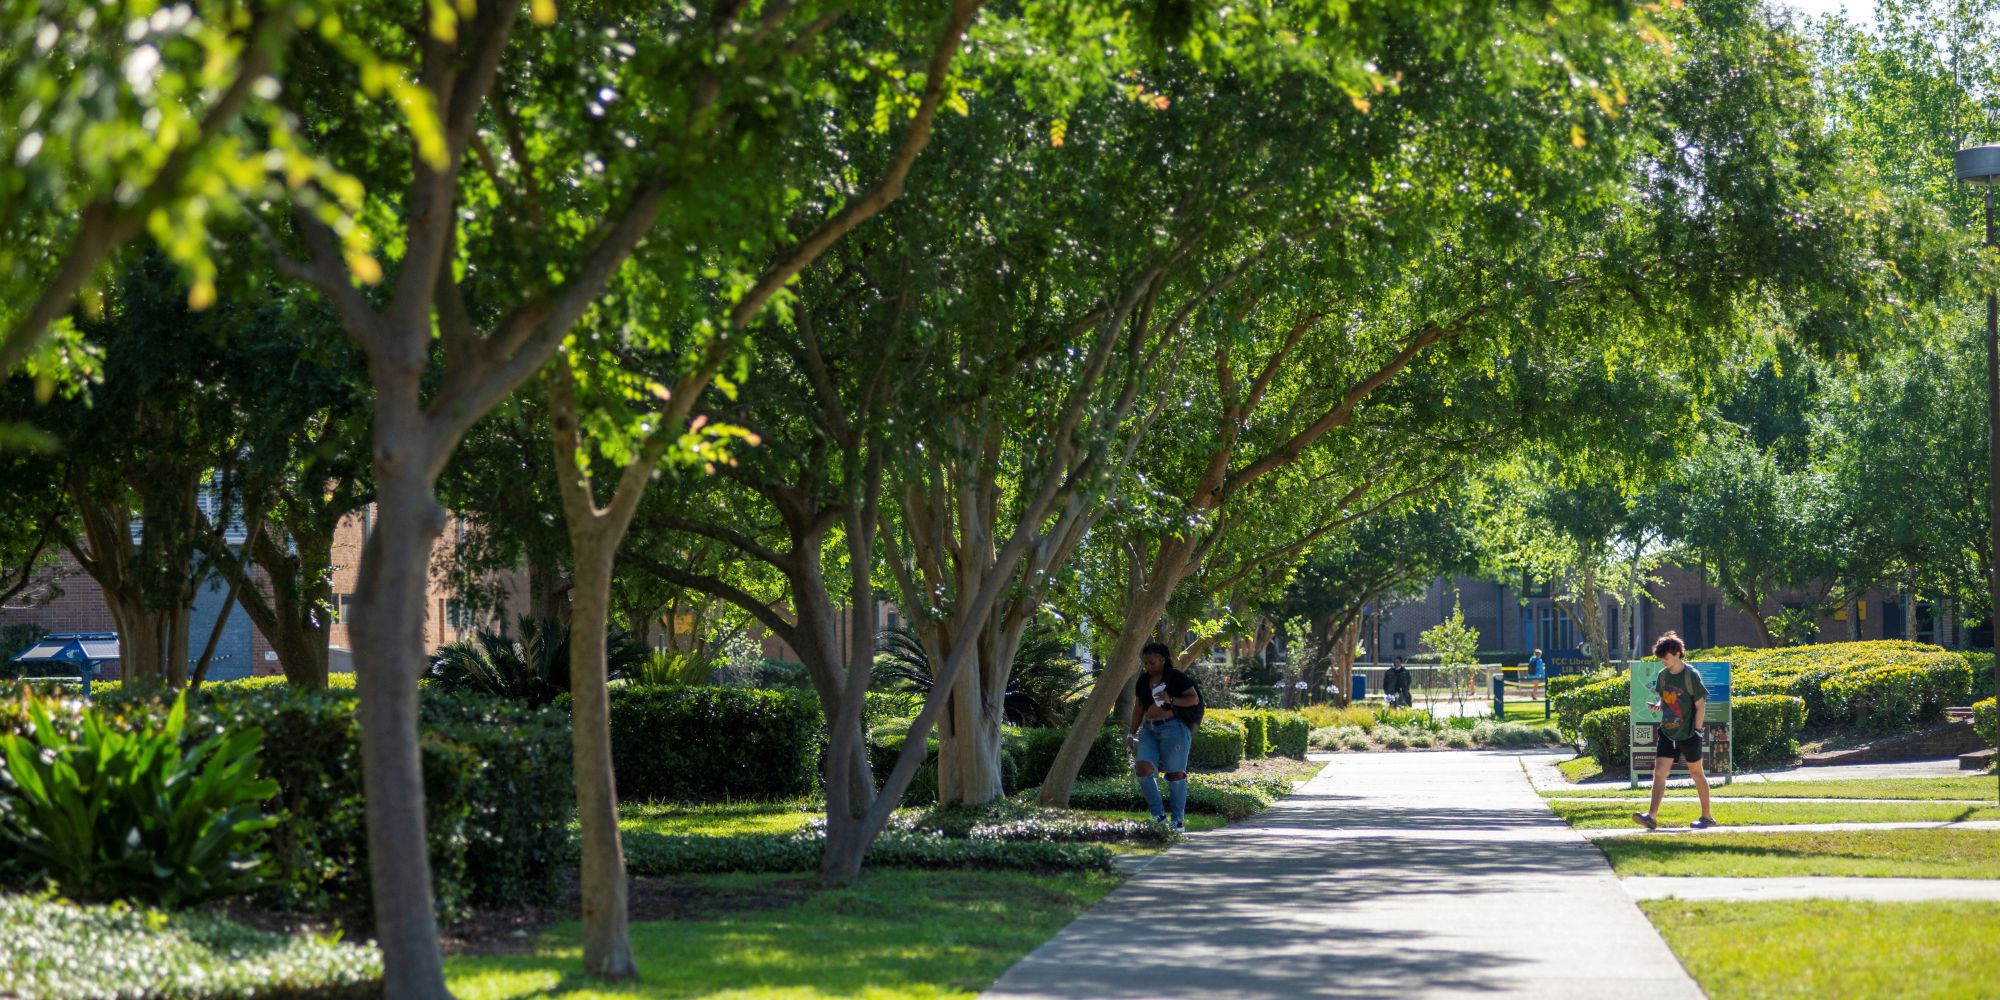 Students walking under trees on campus